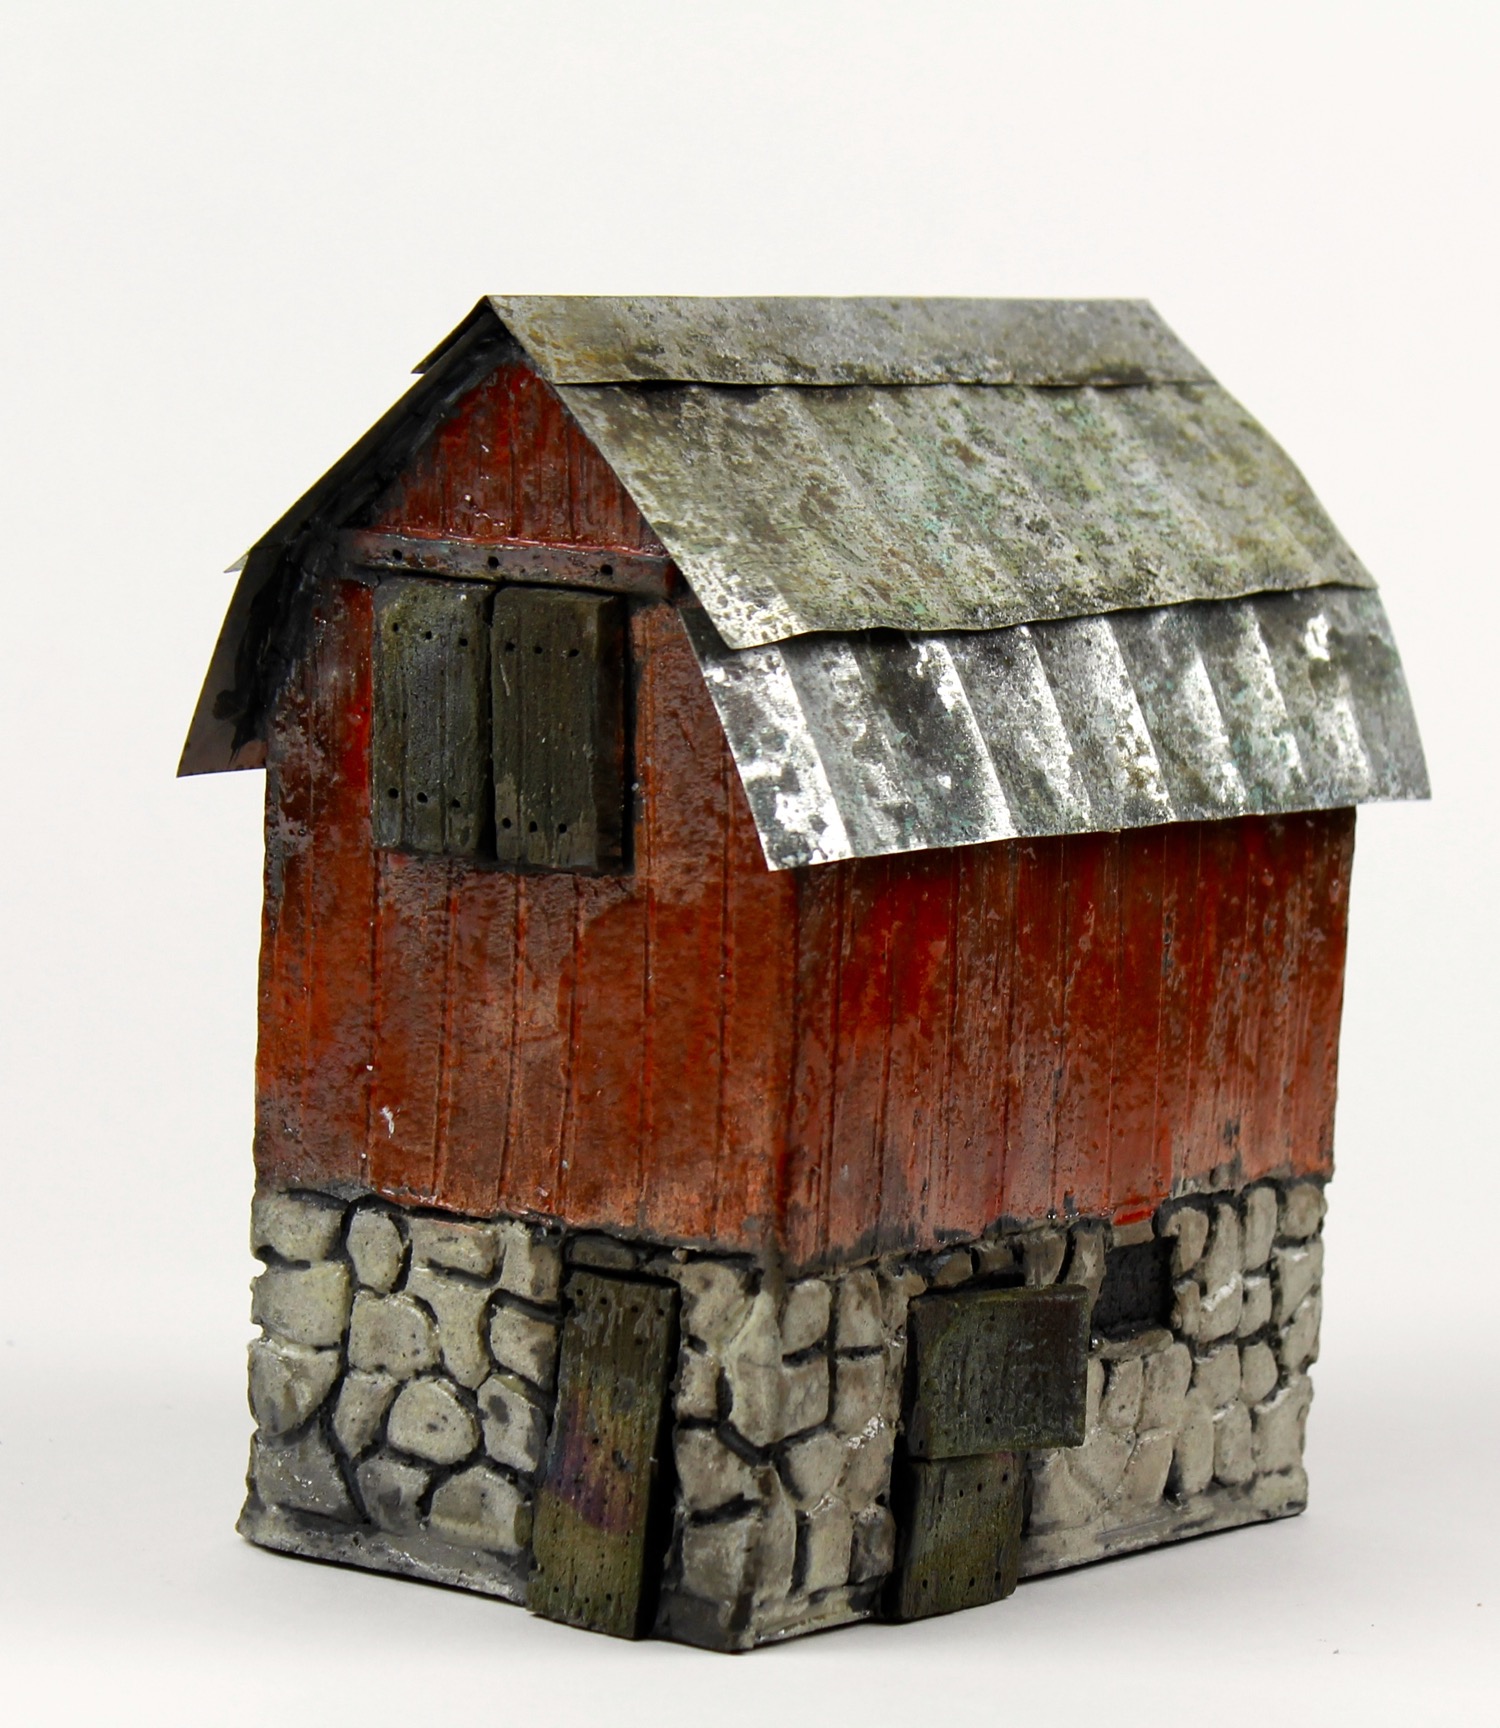  Body (The barn from Body, Mind and Soul.)  Raku and metal, hand-built, 7"x4.5"x7" 